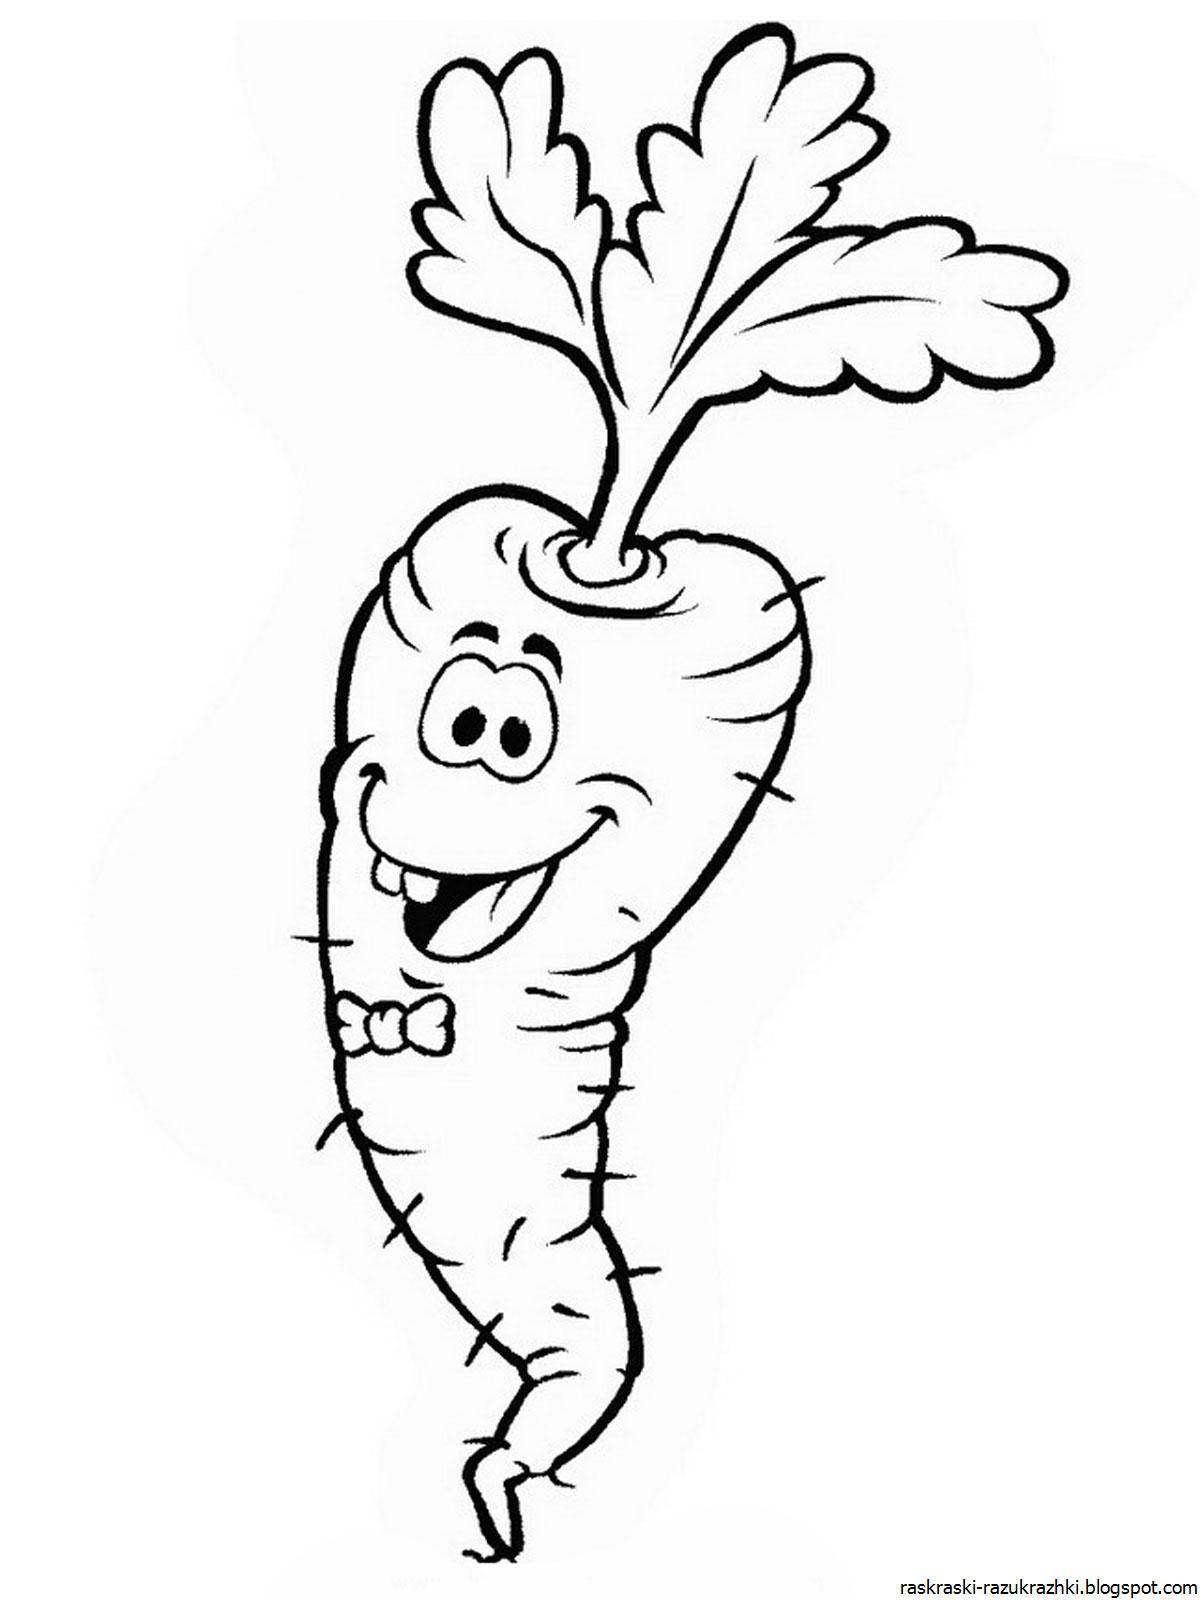 Playful carrot coloring book for kids